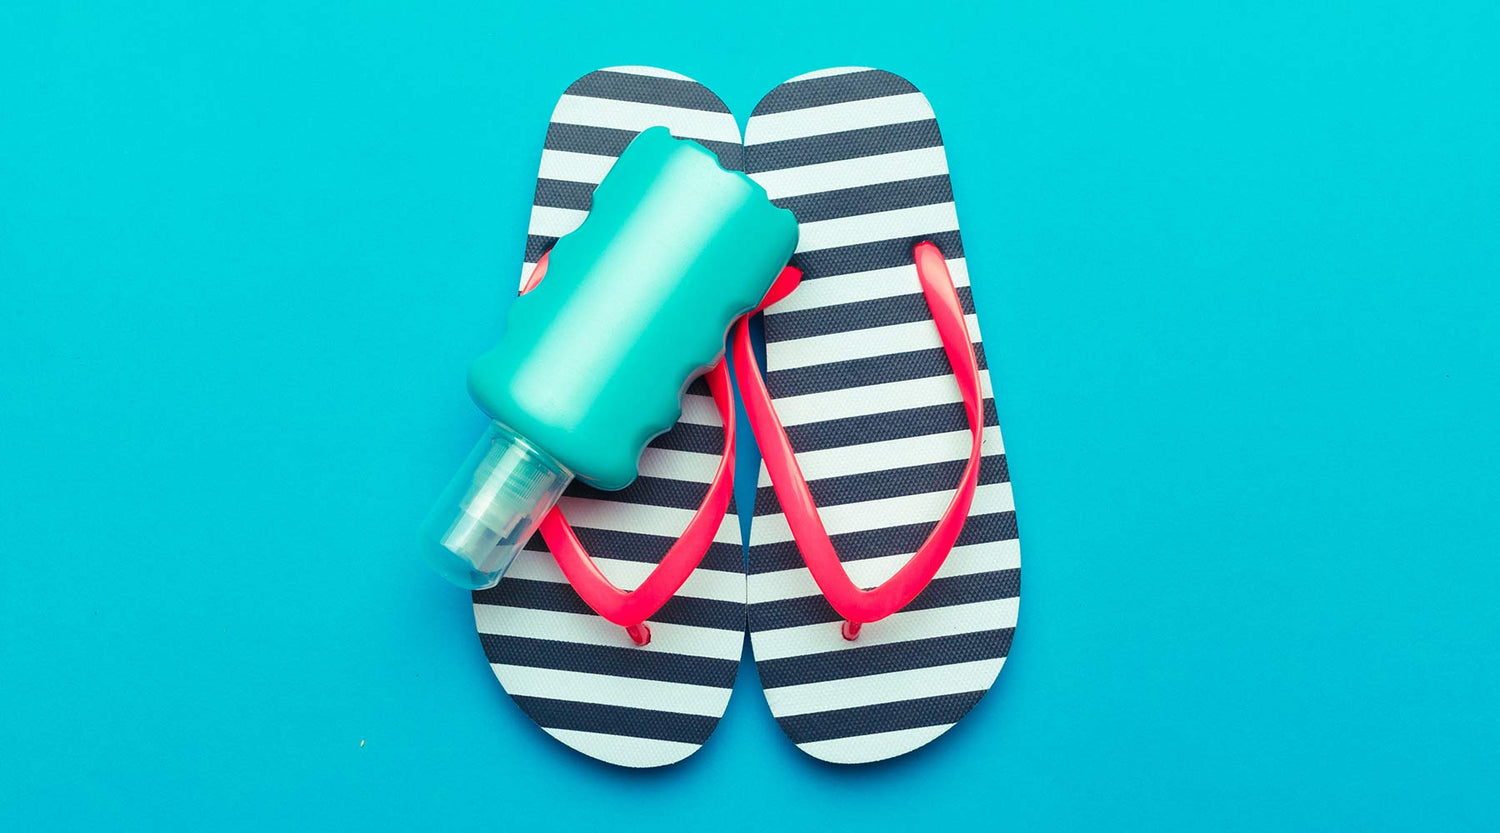 A pair of black and white stripped flip flops sit on a blue background with a bottle of decorative blue flip flop party paint on top.